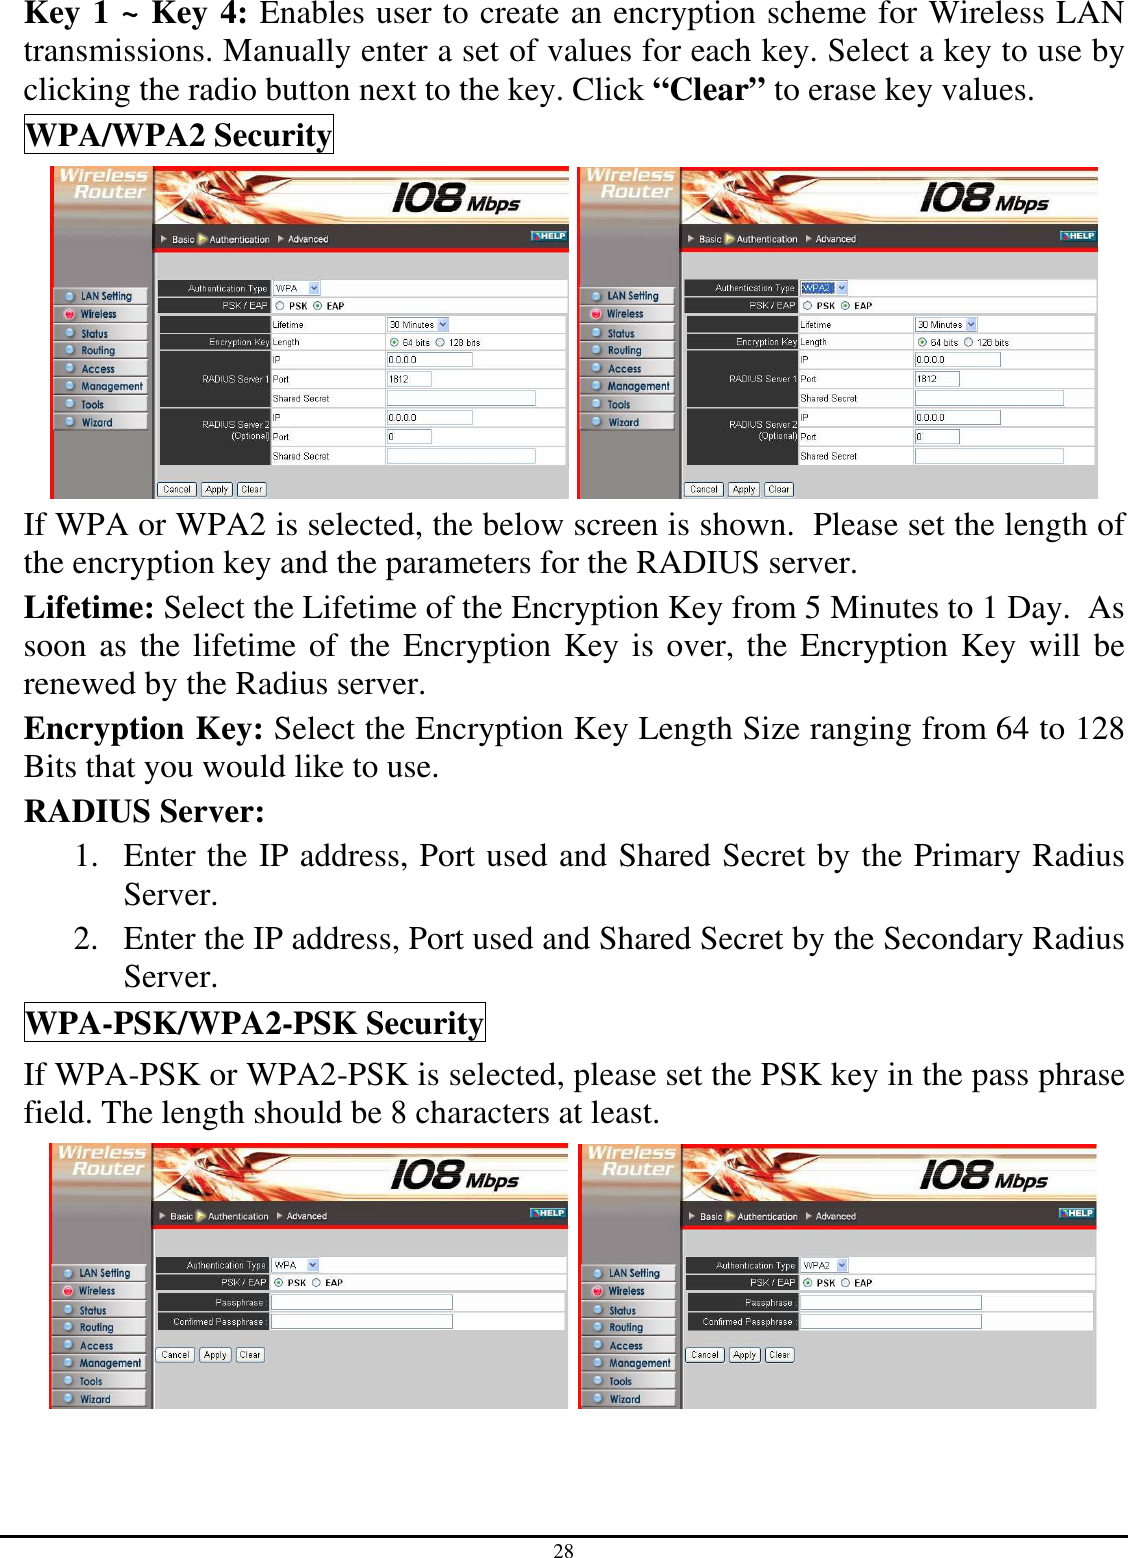 28 Key 1 ~ Key 4: Enables user to create an encryption scheme for Wireless LAN transmissions. Manually enter a set of values for each key. Select a key to use by clicking the radio button next to the key. Click “Clear” to erase key values. WPA/WPA2 Security    If WPA or WPA2 is selected, the below screen is shown.  Please set the length of the encryption key and the parameters for the RADIUS server. Lifetime: Select the Lifetime of the Encryption Key from 5 Minutes to 1 Day.  As soon as the lifetime of the Encryption Key is over, the Encryption Key will be renewed by the Radius server. Encryption Key: Select the Encryption Key Length Size ranging from 64 to 128 Bits that you would like to use. RADIUS Server:  1. Enter the IP address, Port used and Shared Secret by the Primary Radius Server. 2. Enter the IP address, Port used and Shared Secret by the Secondary Radius Server. WPA-PSK/WPA2-PSK Security If WPA-PSK or WPA2-PSK is selected, please set the PSK key in the pass phrase field. The length should be 8 characters at least.    